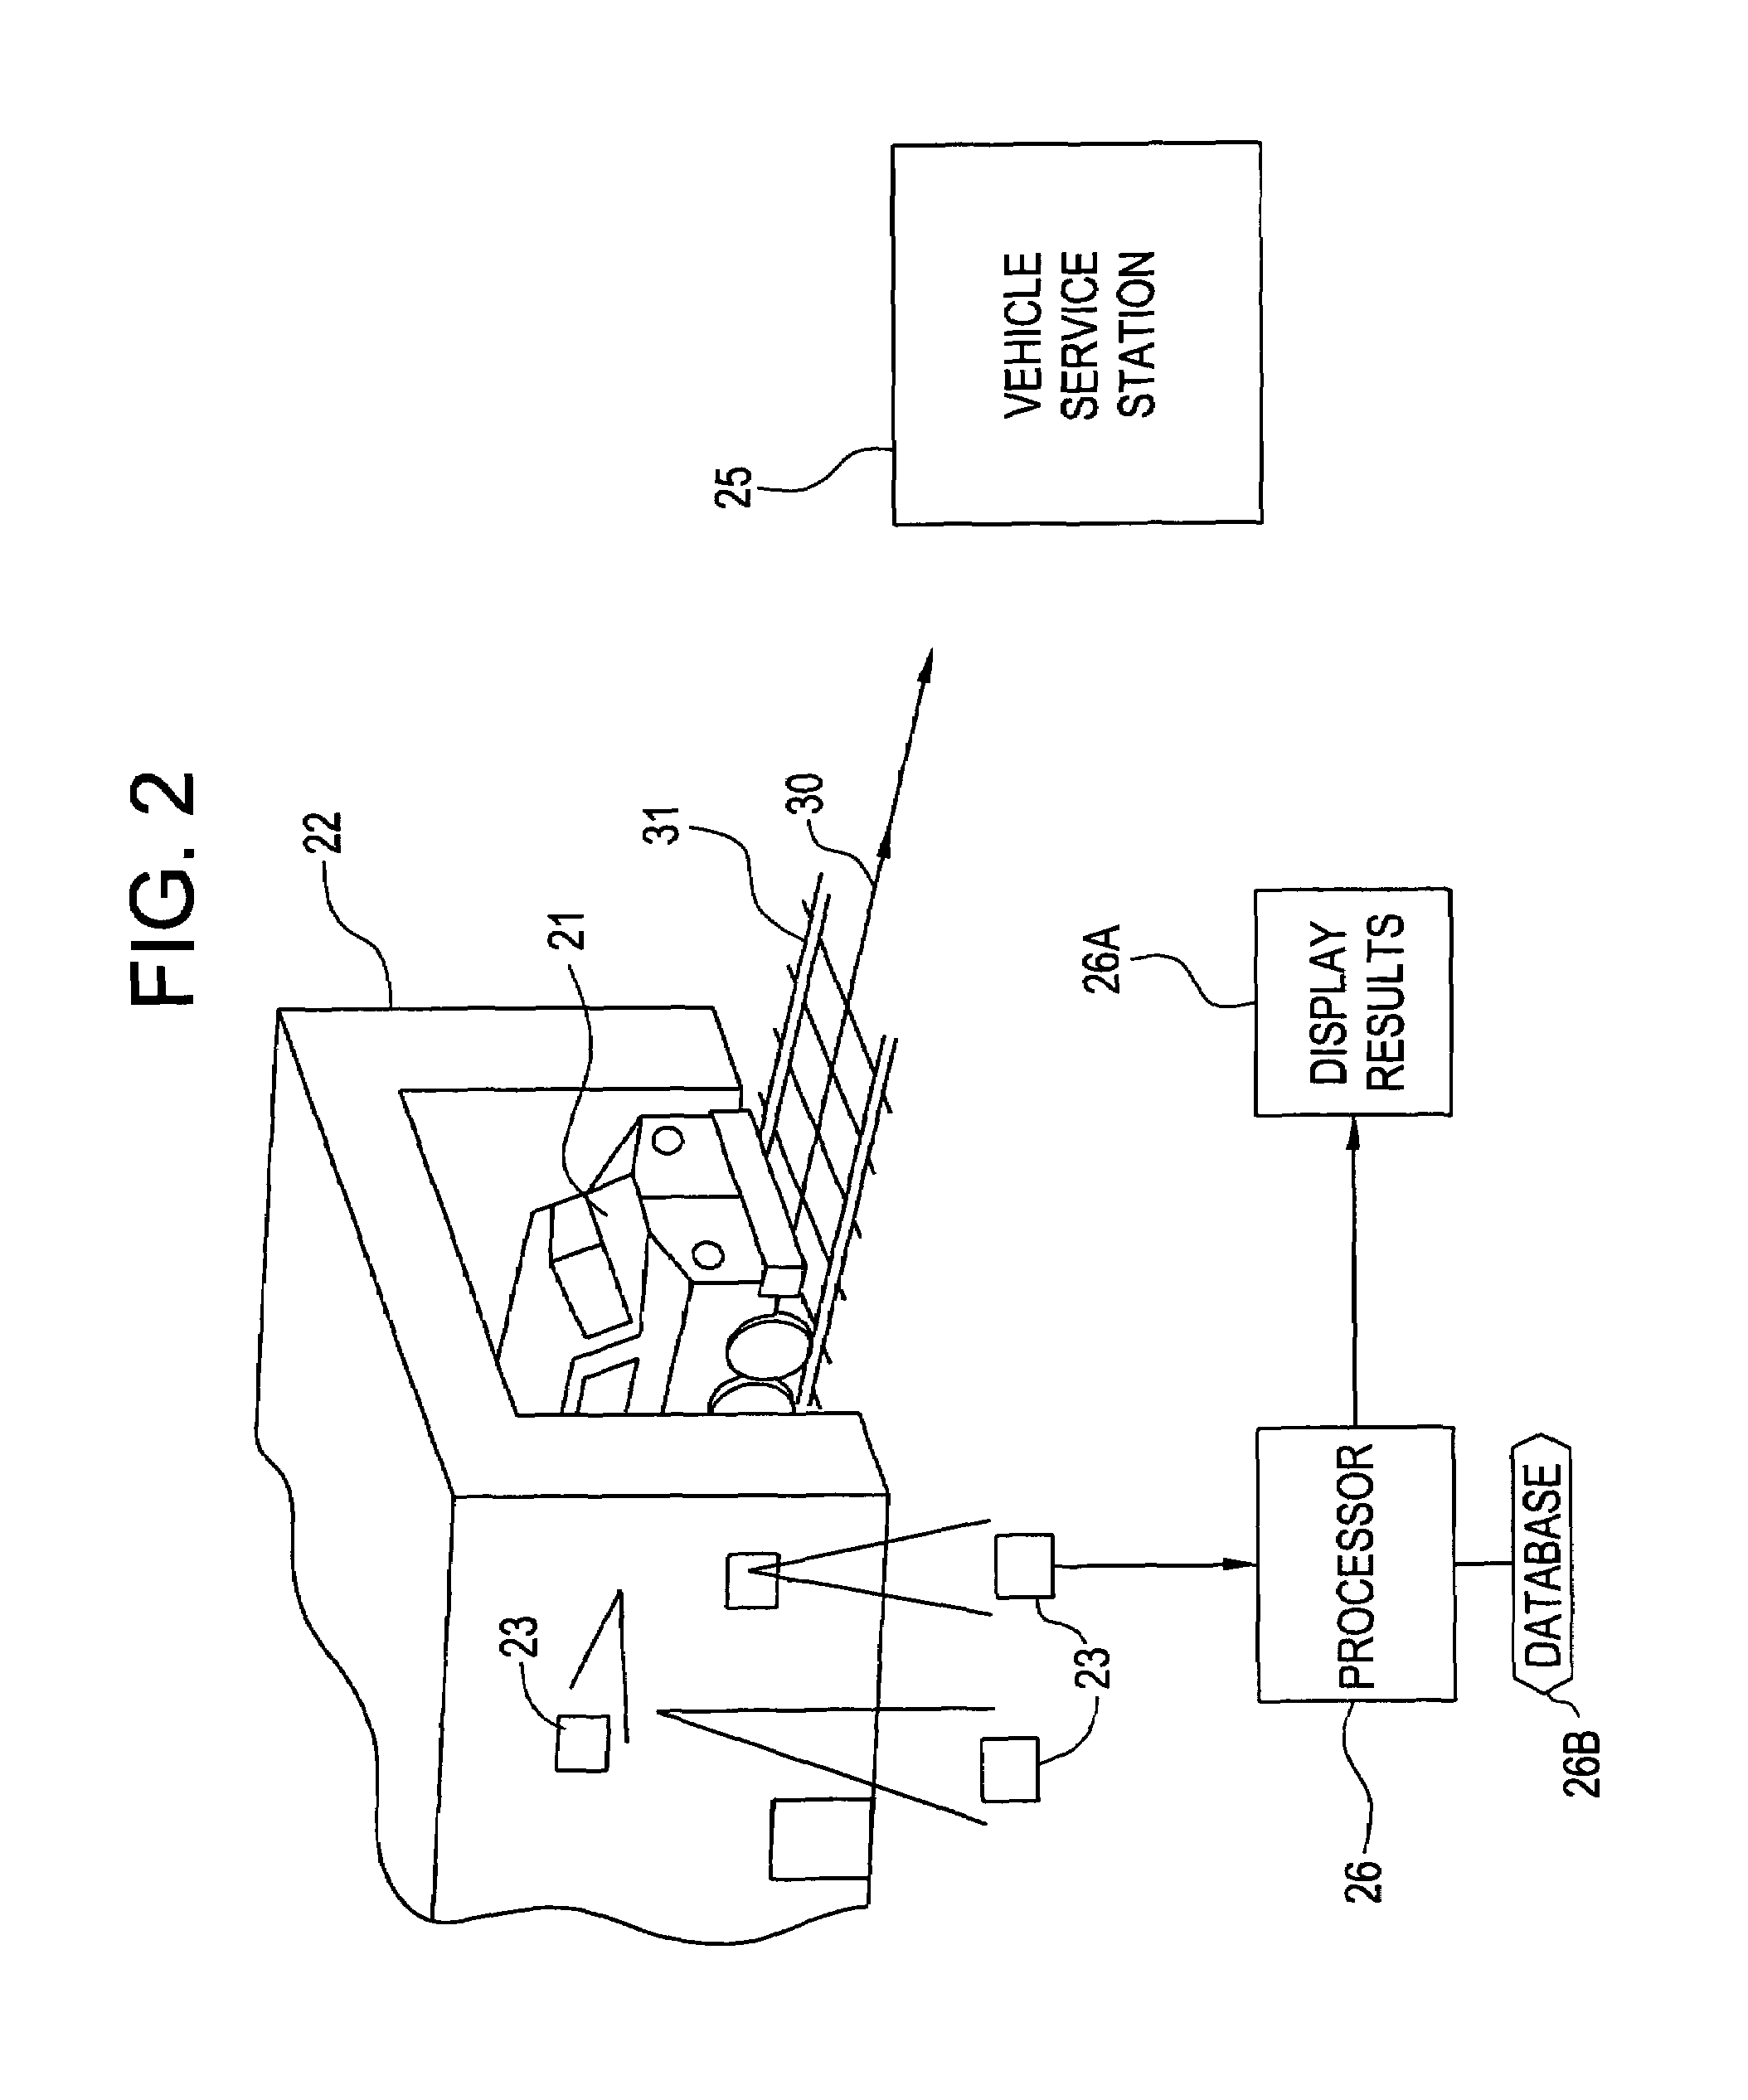 System and method for monitoring the condition of a vehicle